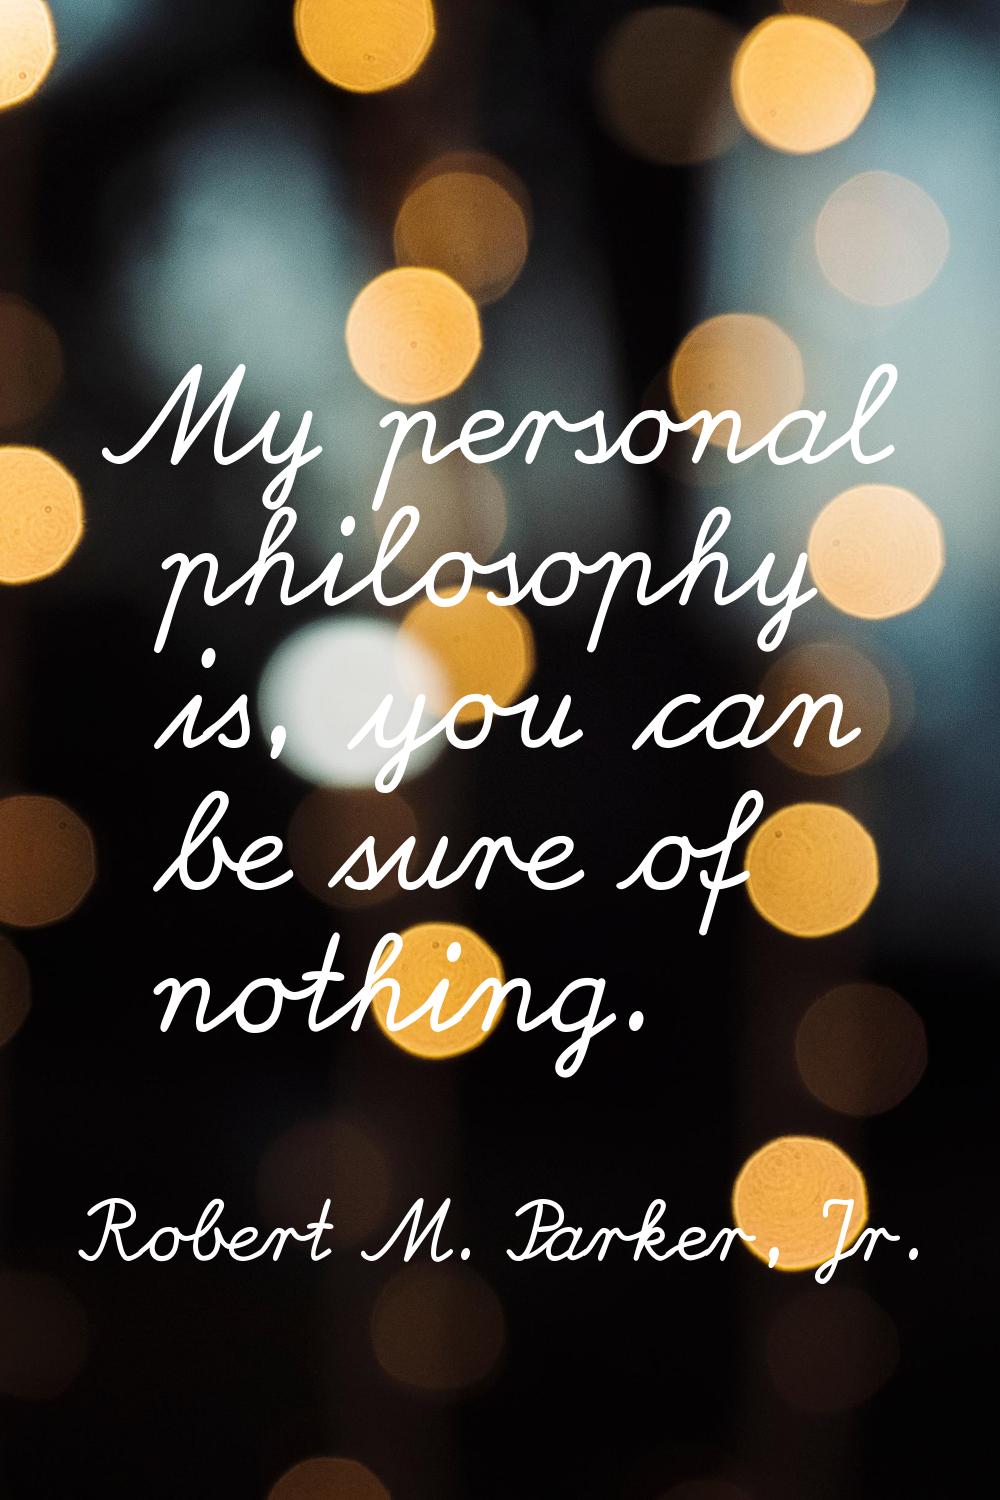 My personal philosophy is, you can be sure of nothing.